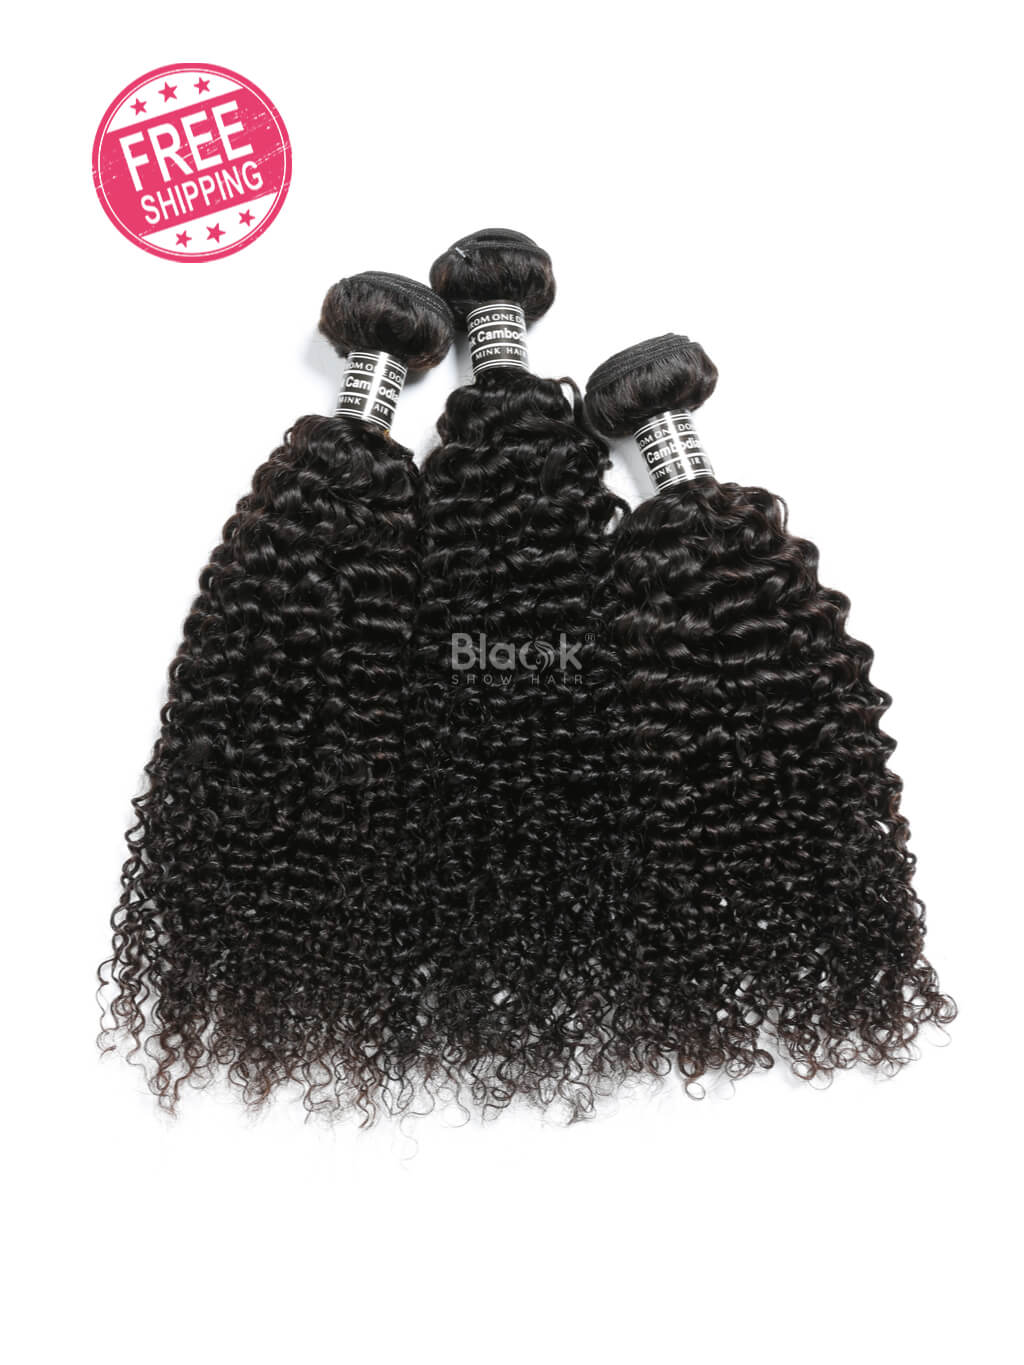 curly wave 3 bundles deal cambodian hair